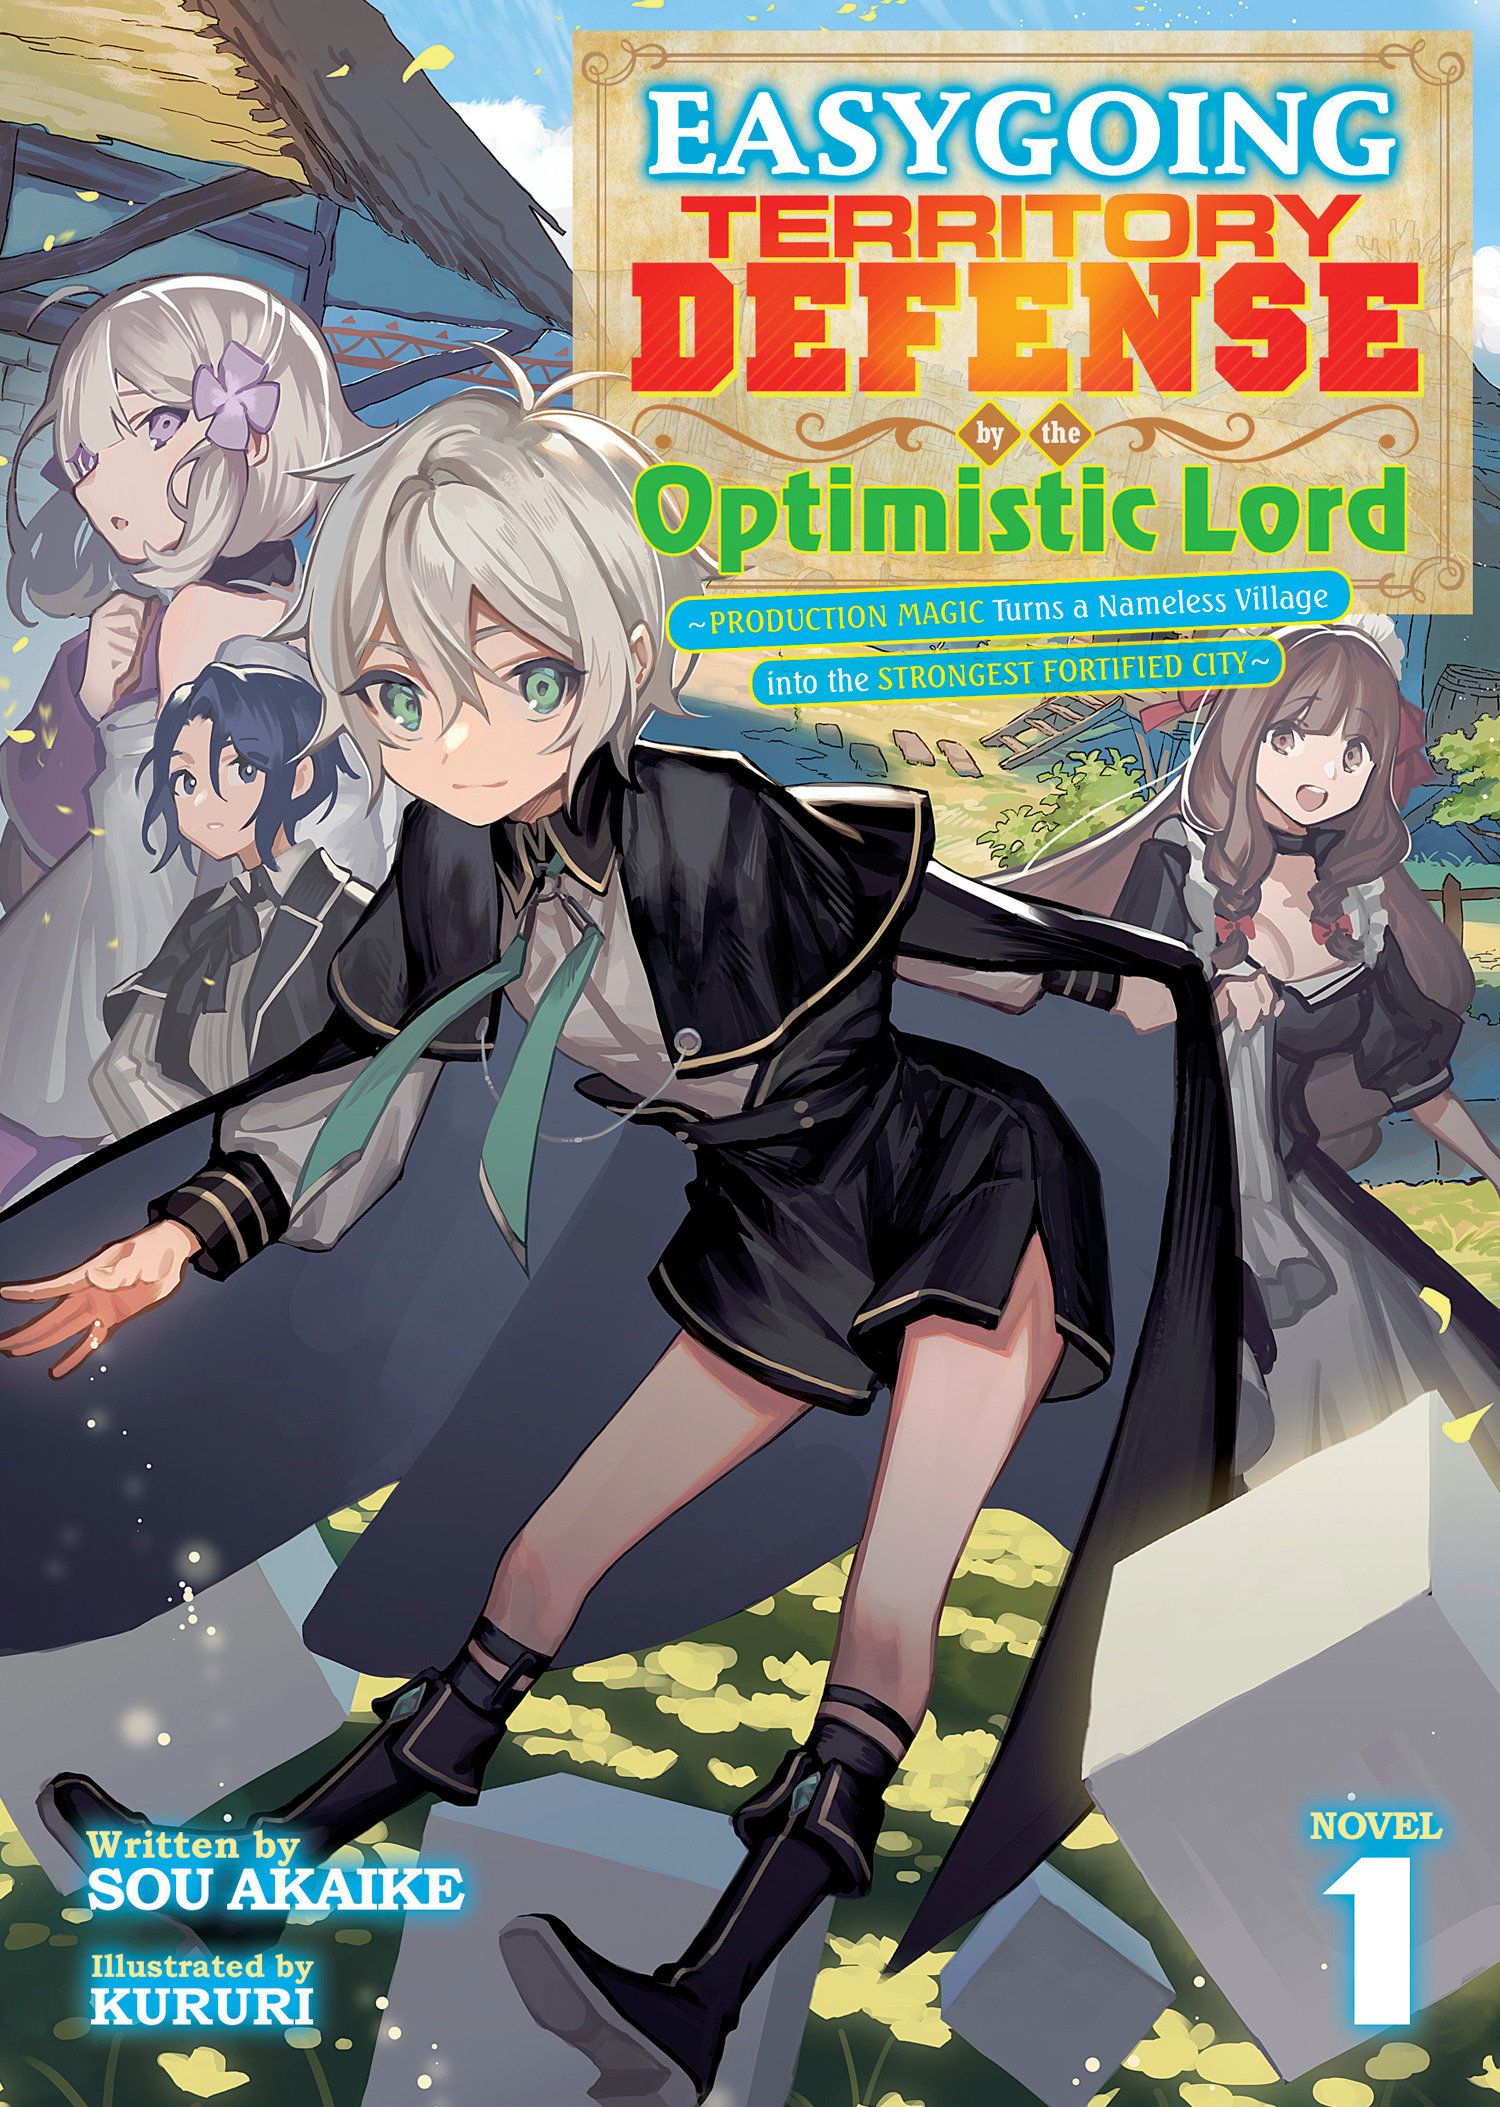 Easygoing Territory Defense by the Optimistic Lord: Production Magic Turns a Nameless Village into the Strongest Fortified City Light Novel Volume 1